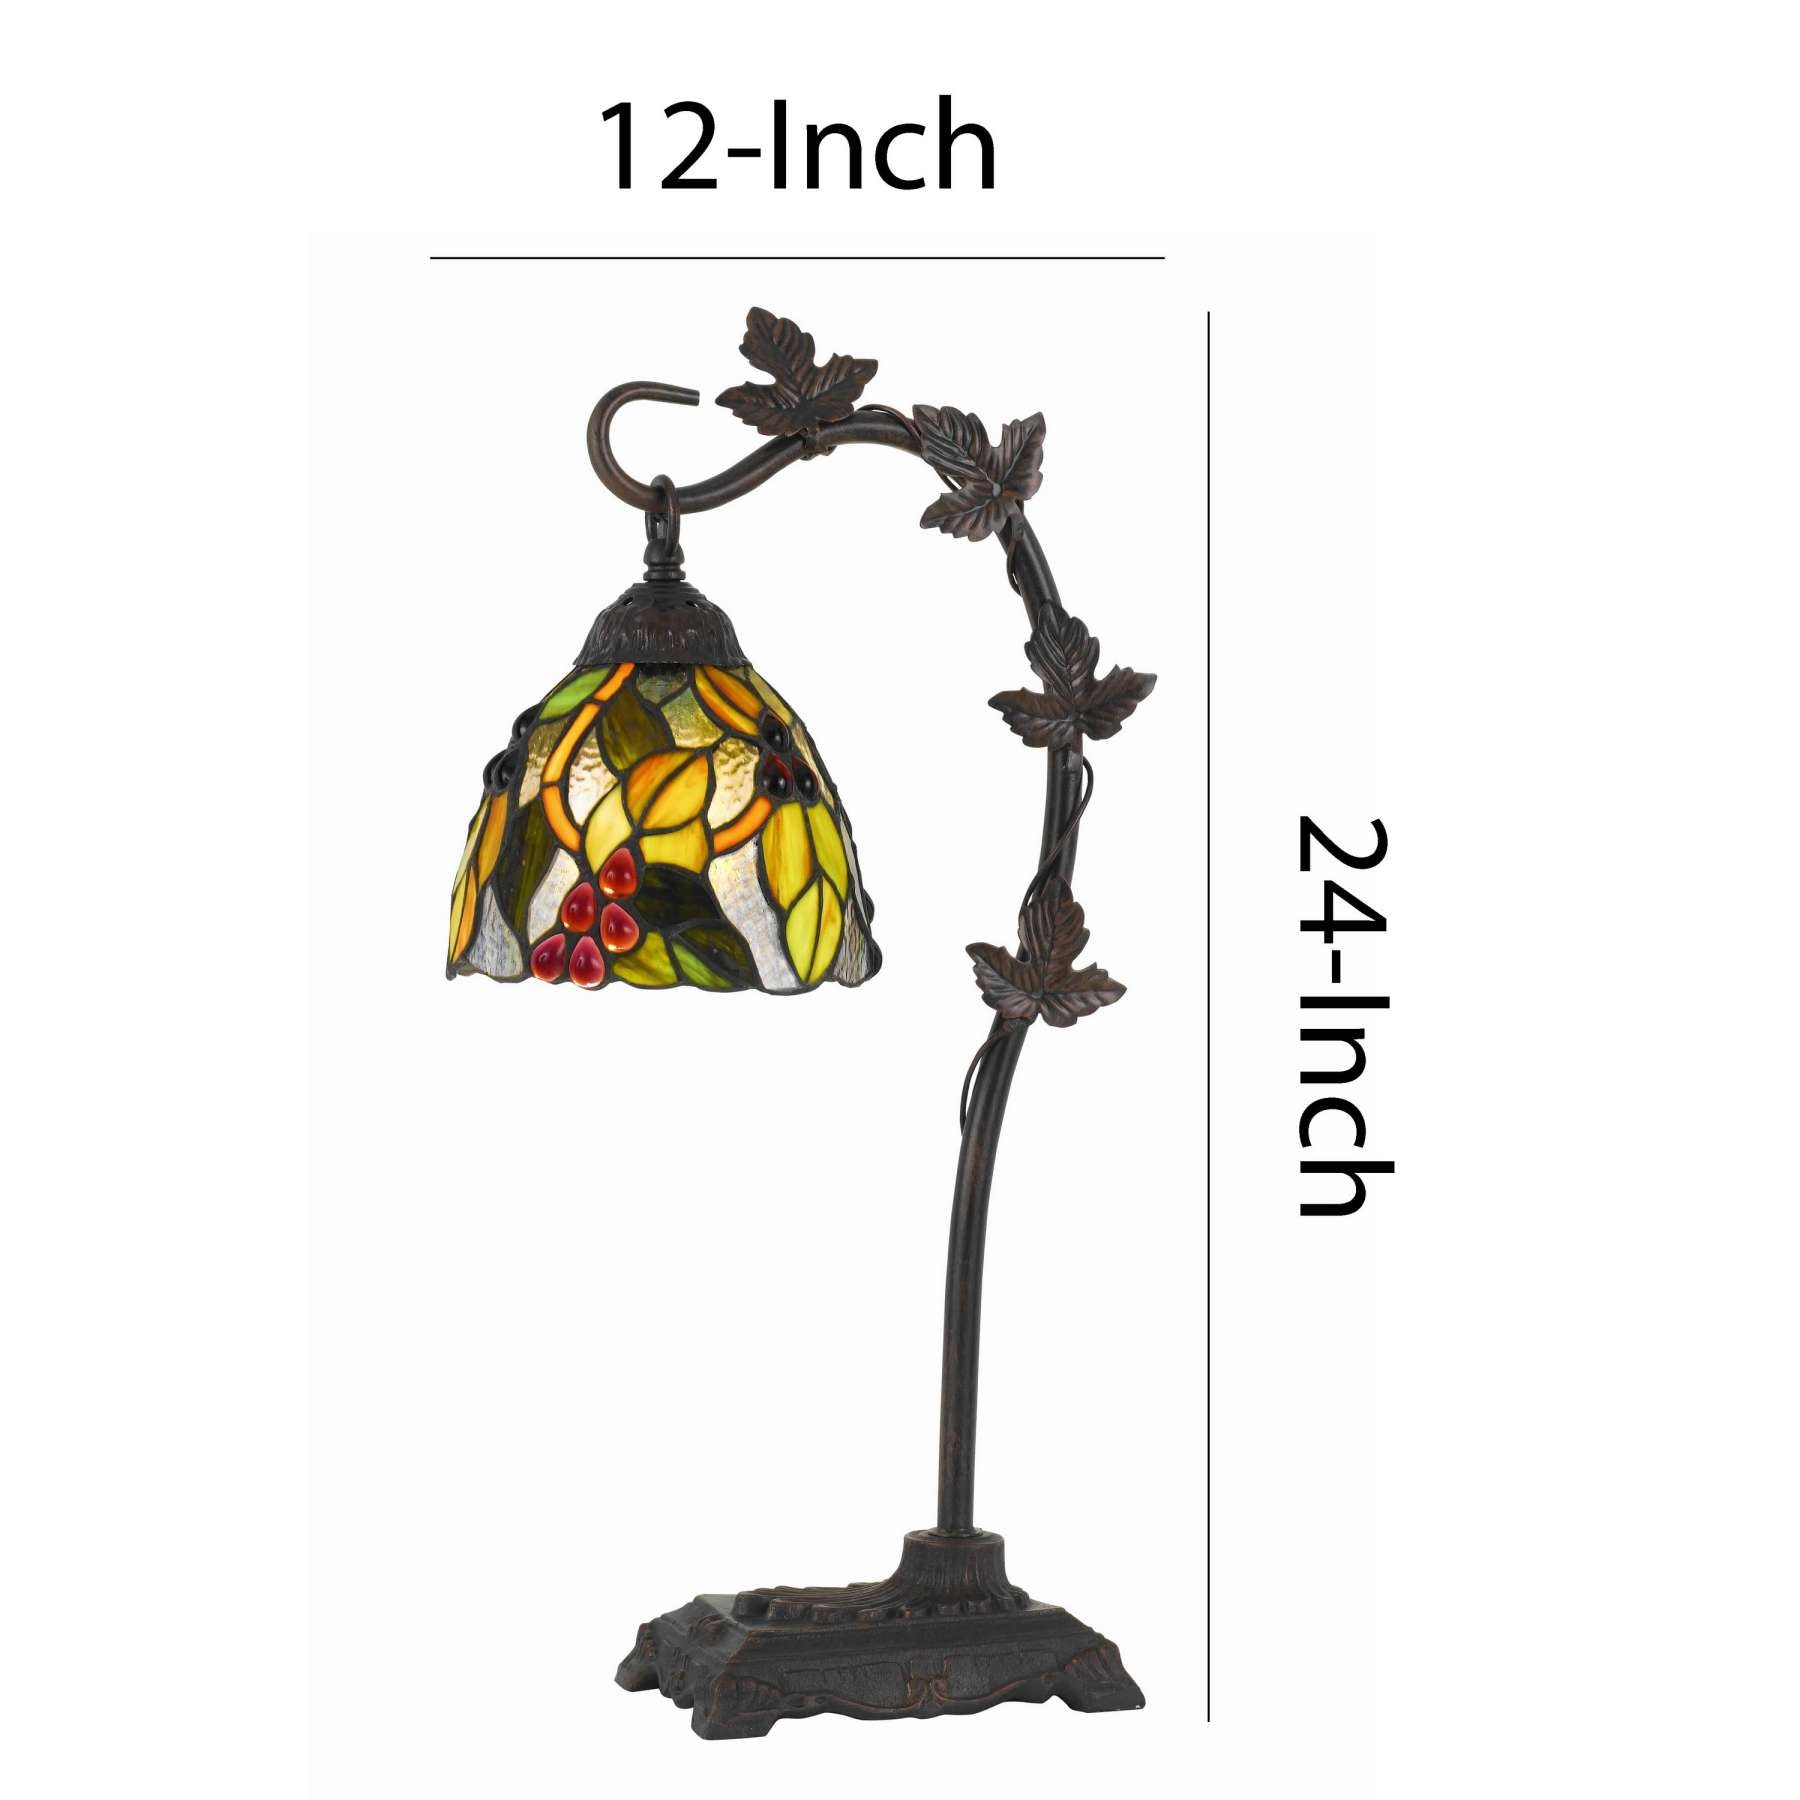 Hand Painted Table Lamp With Intricate Leaf Design Arched Base, Multicolor By Benzara